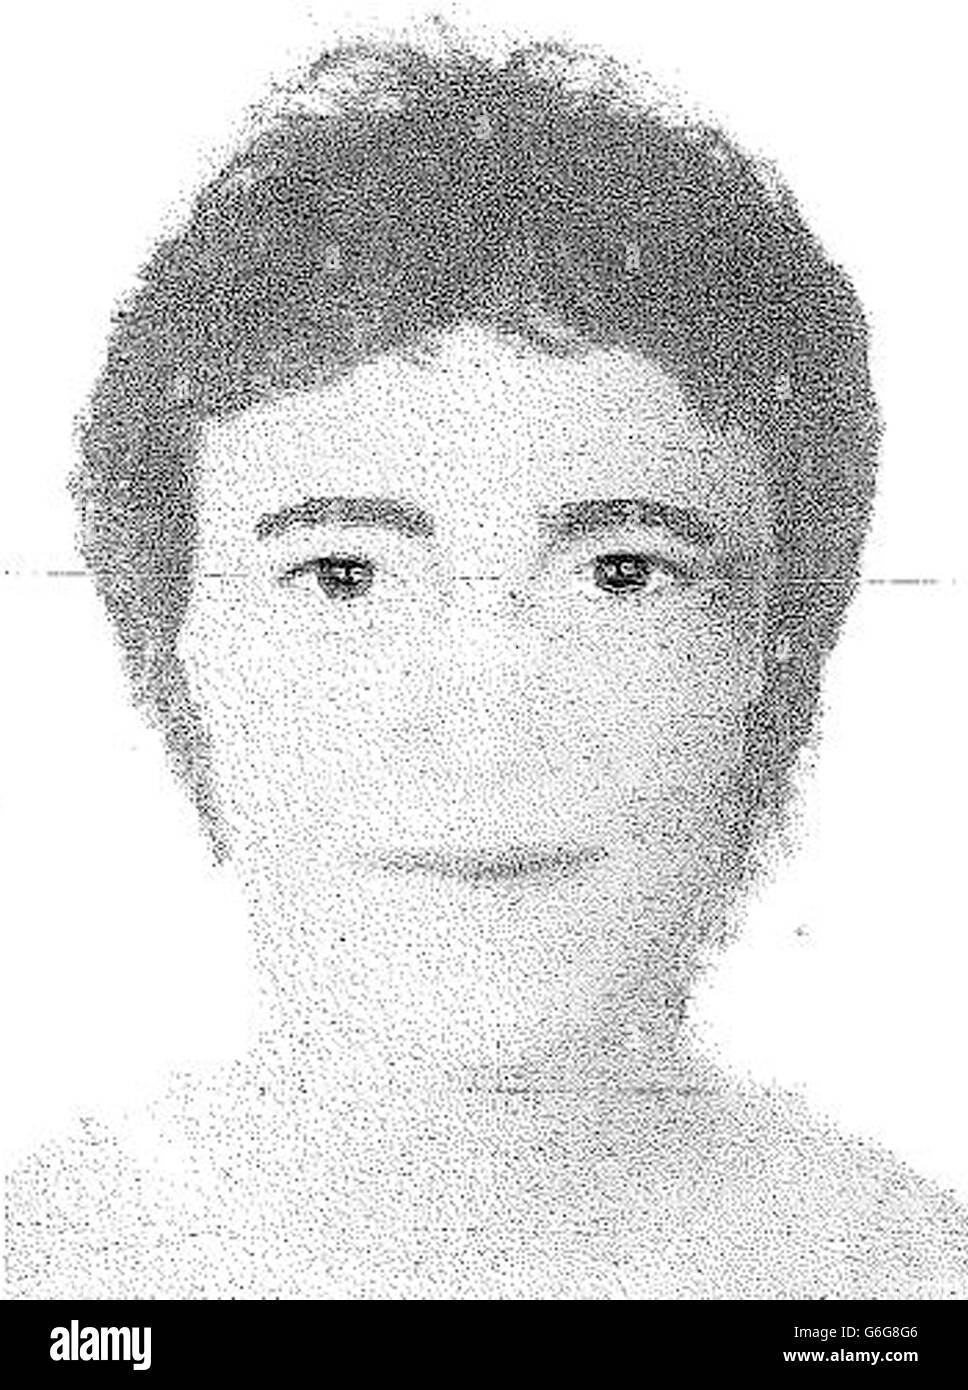 BEST QUALITY AVAILABLE Undated e-fit image issued by the Metropolitan Police, as part of the investigations into the disappearance of Madeleine McCann in 2007, of one of two men who approached a property on the Rua do Ramalhete, near to the Ocean Club, on 3 May at approximately 1600. He is described as Portuguese, with medium length wavy hair, aged 25-30 years old. He is said to have spoken good English. Stock Photo